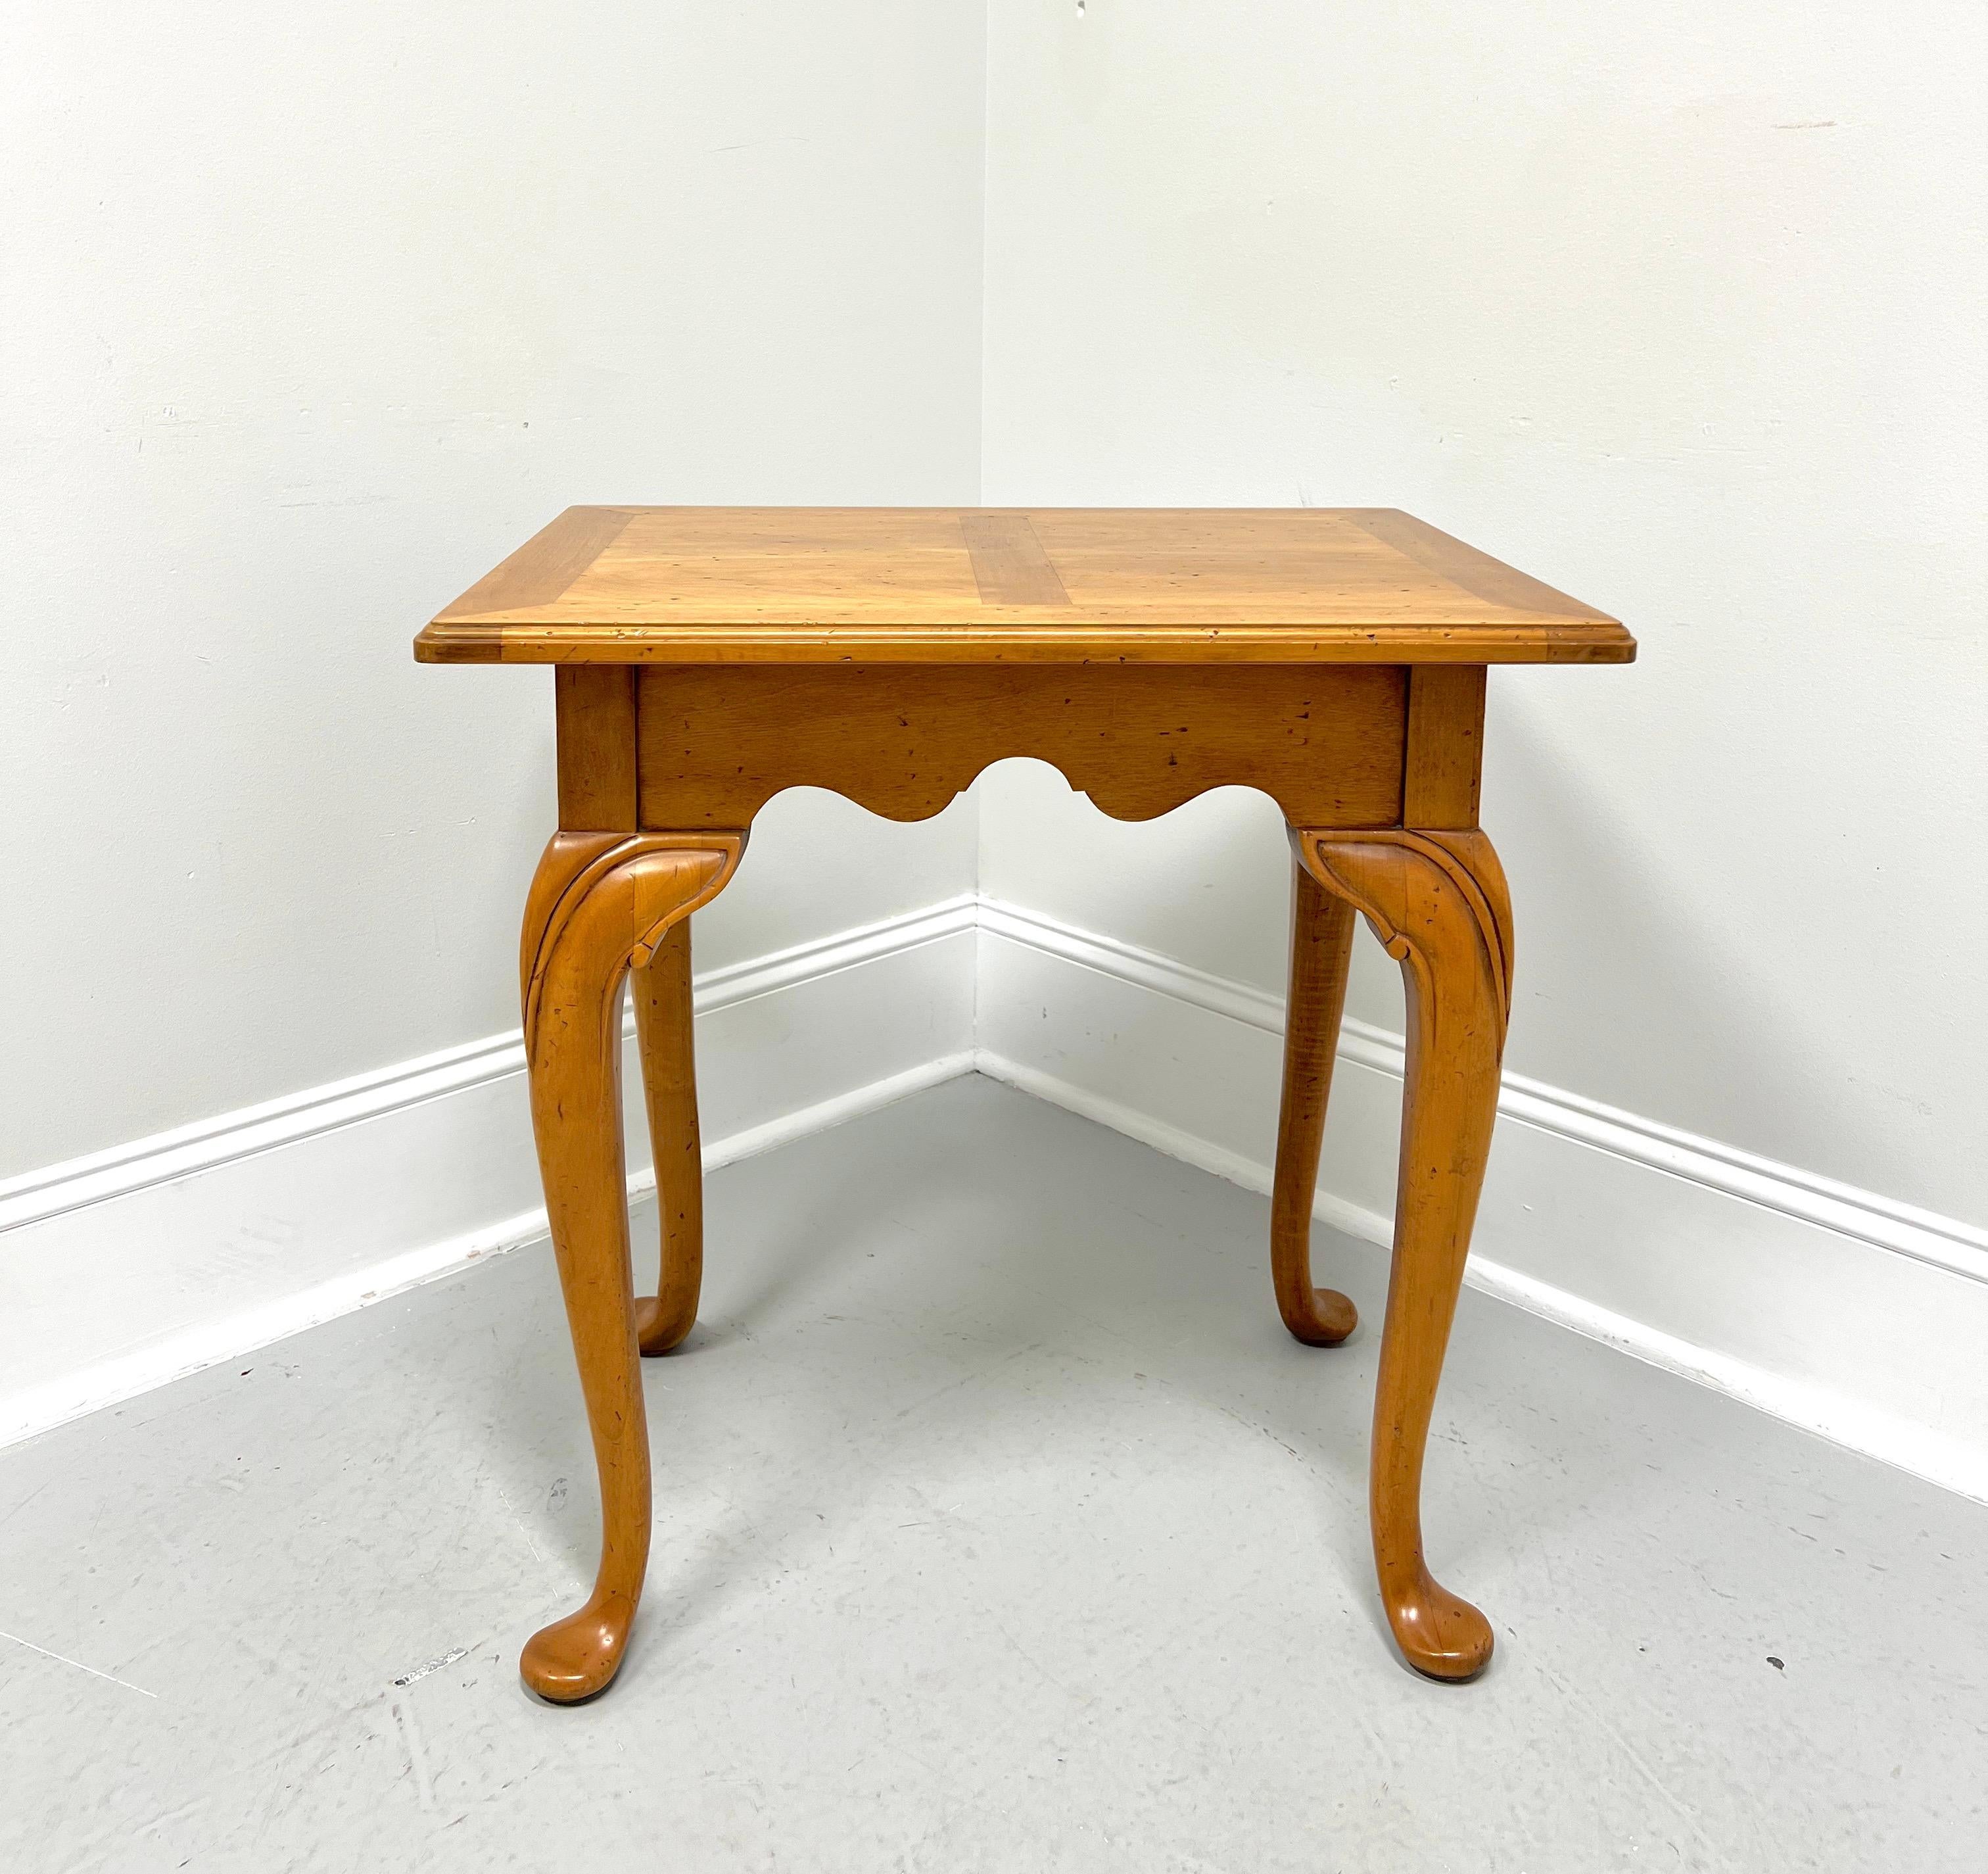 A Cottage / Farmhouse style accent table, unbranded, possibly Hickory Chair or Henredon. Maple with a banded ogee edge top, finished on all sides, carved apron, carved knees, cabriole legs, and pad feet. Made in the USA, in the late 20th